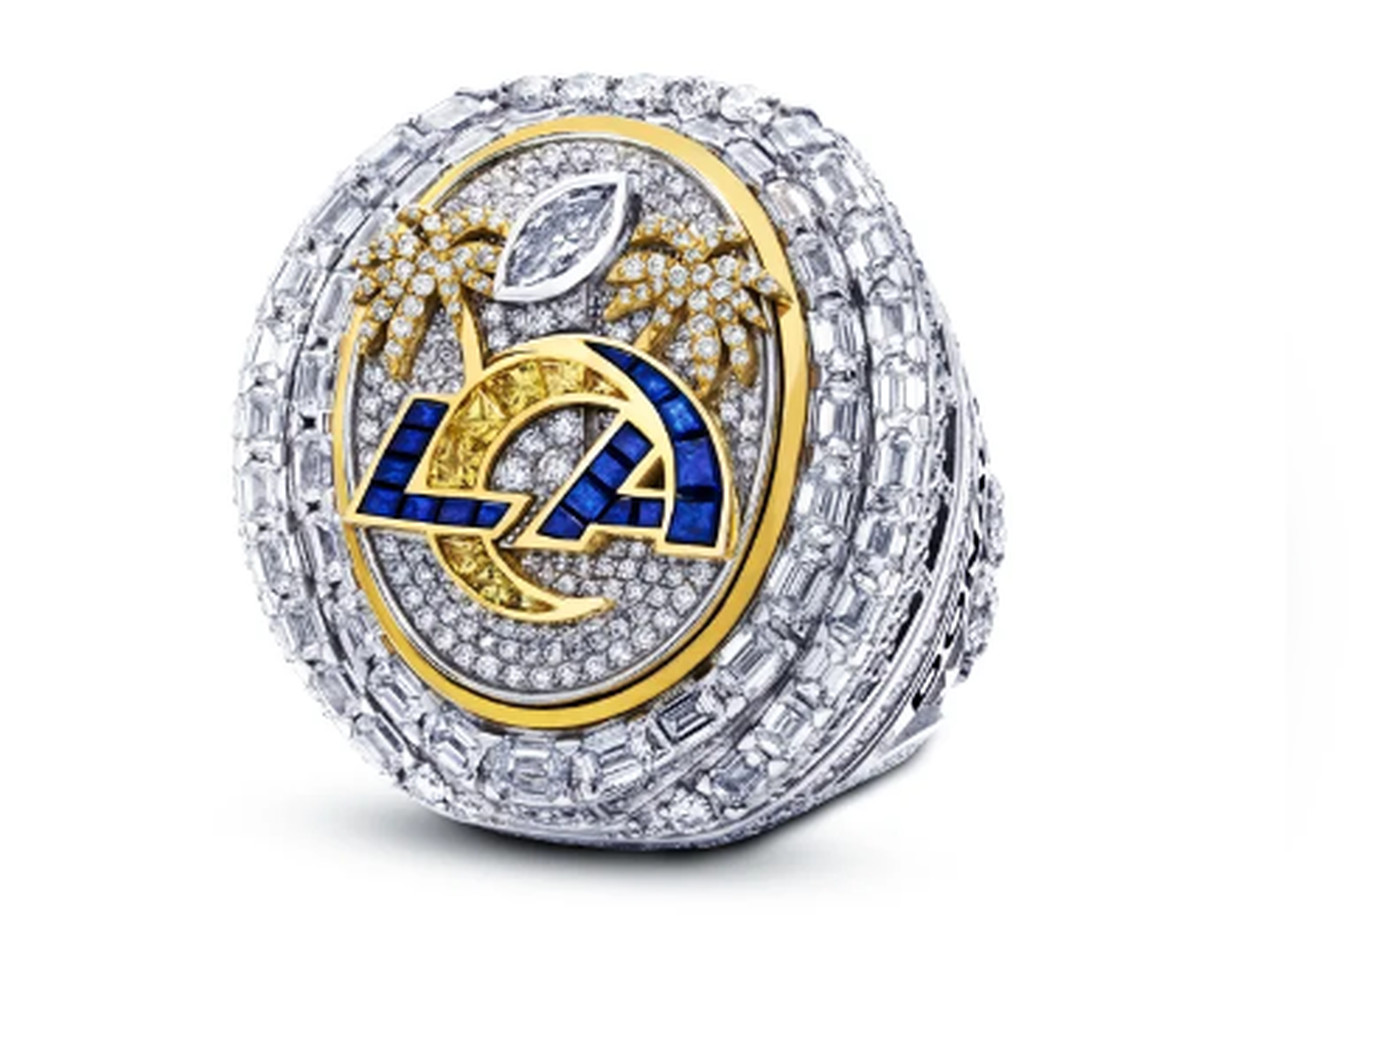 LA Rams Super Bowl LVI rings have arrived and they are breathtaking - Turf  Show Times